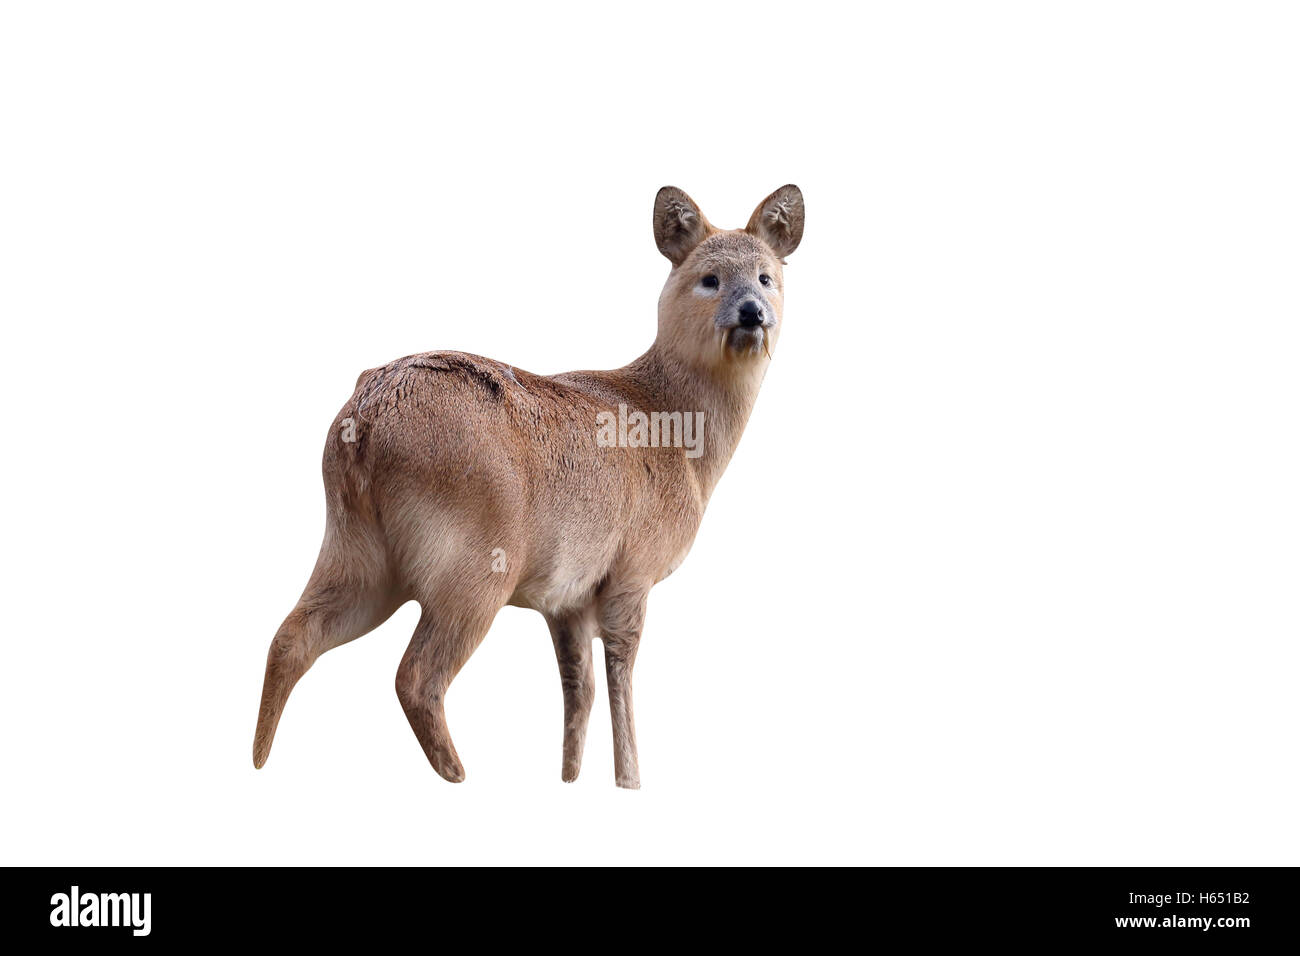 Chinese water deer, Hydropotes inermis, single mammal on grass, Bedfordshire, February 2013 Stock Photo